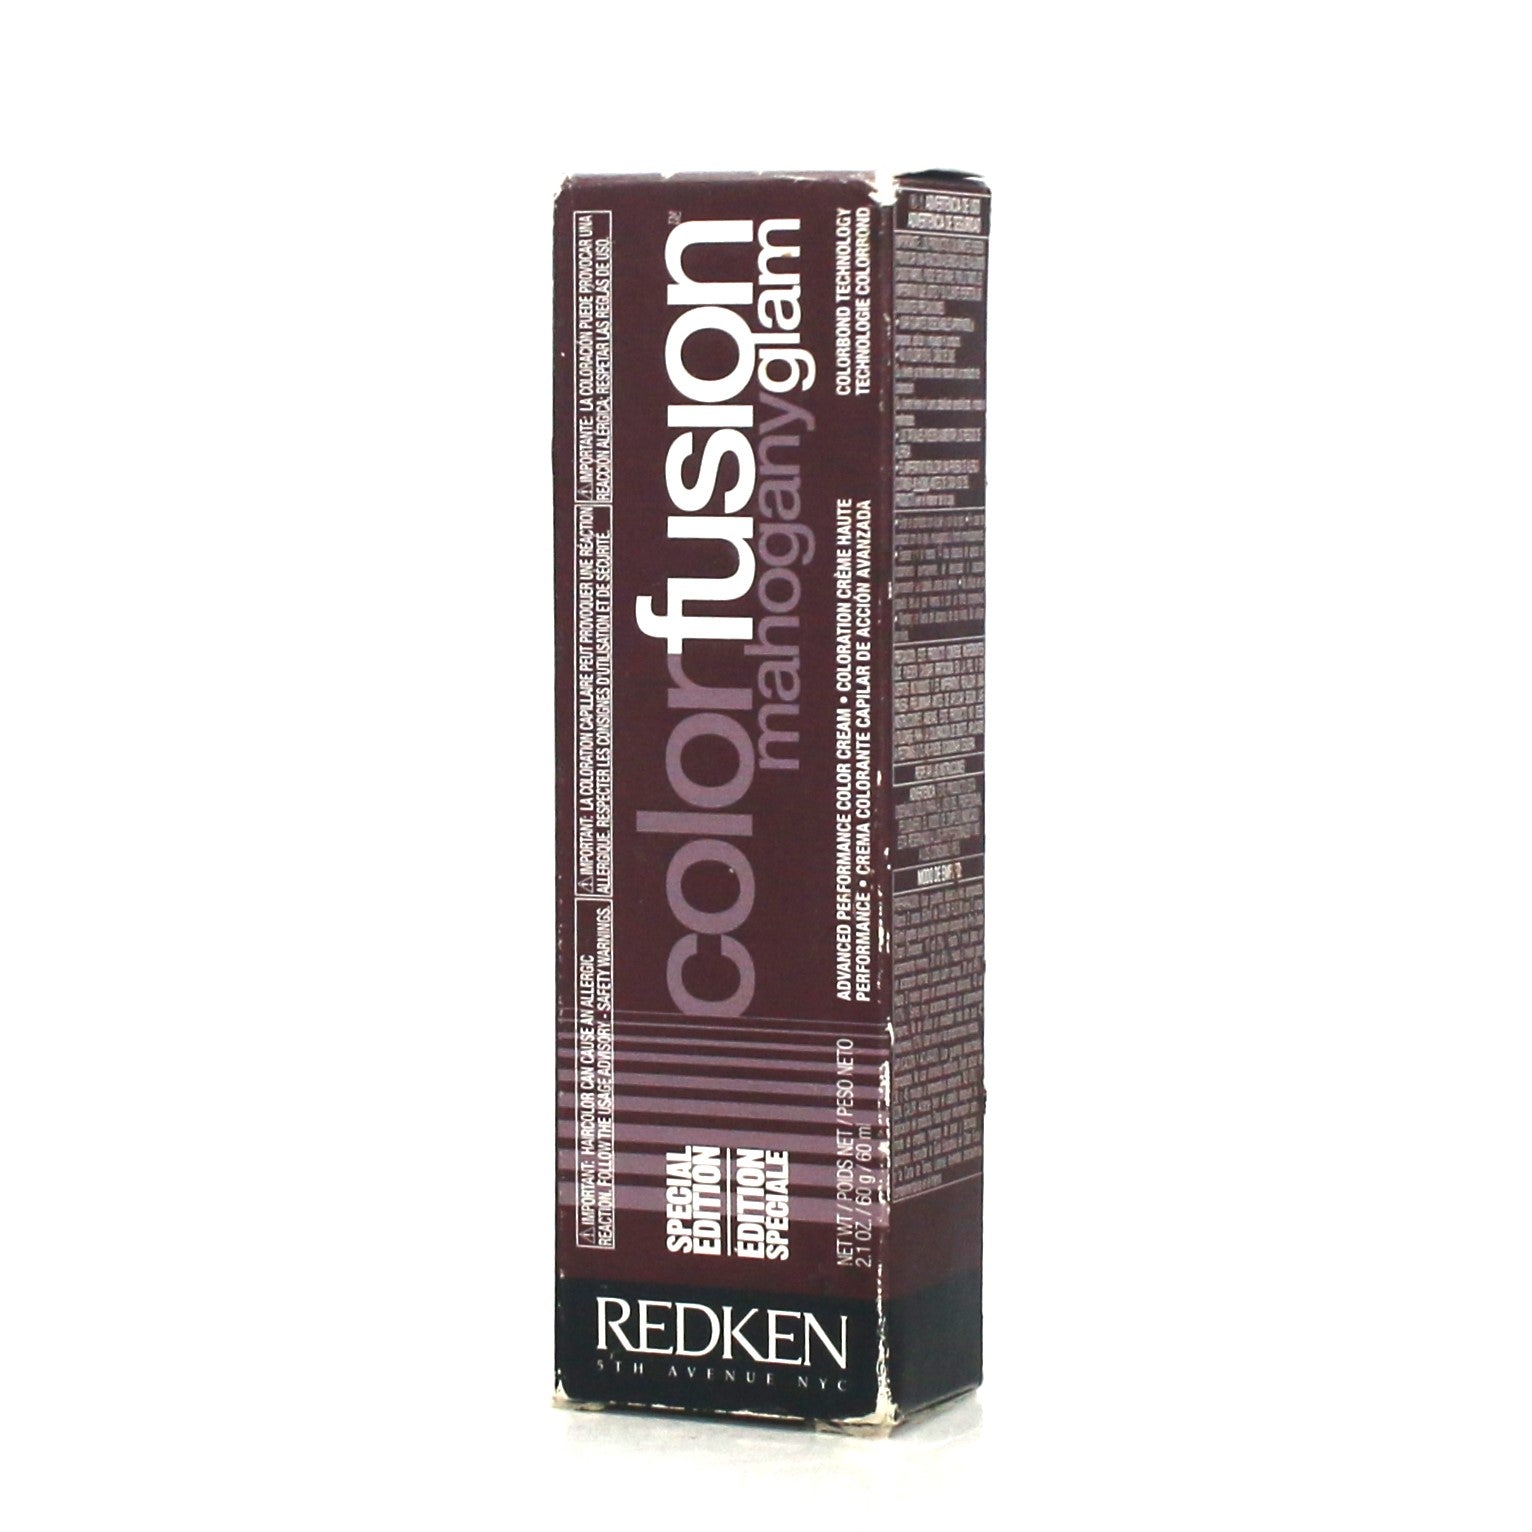 Redken Color Fusion Maghogany Glam Advanced Performance Color Cream 2 Overstock Beauty Supply 